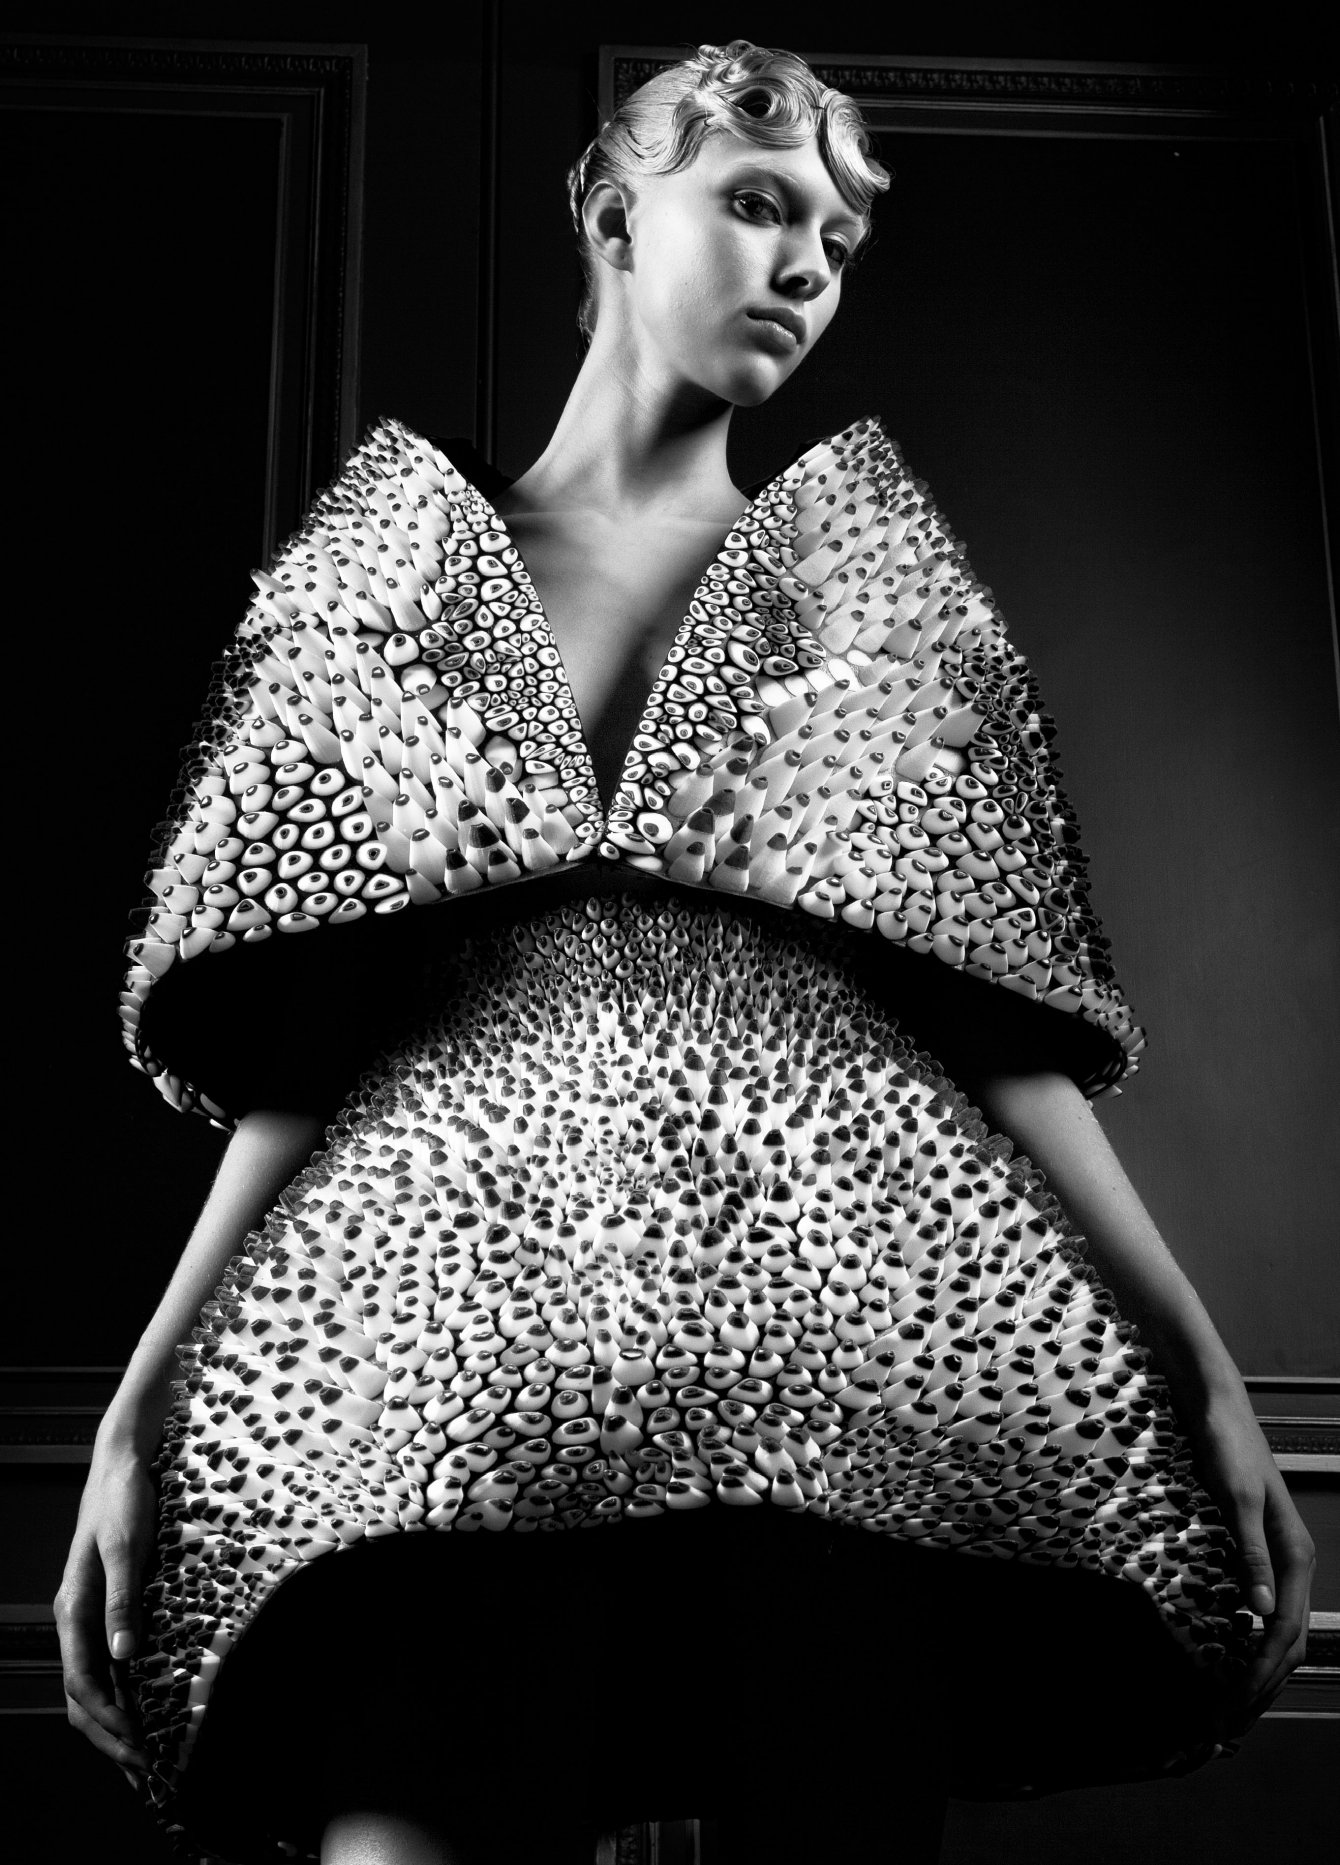 Oxman and Iris Van Herpen’s Anthozoa 3D-printed skirt and cape, part of the collection of VOLTAGE garments.